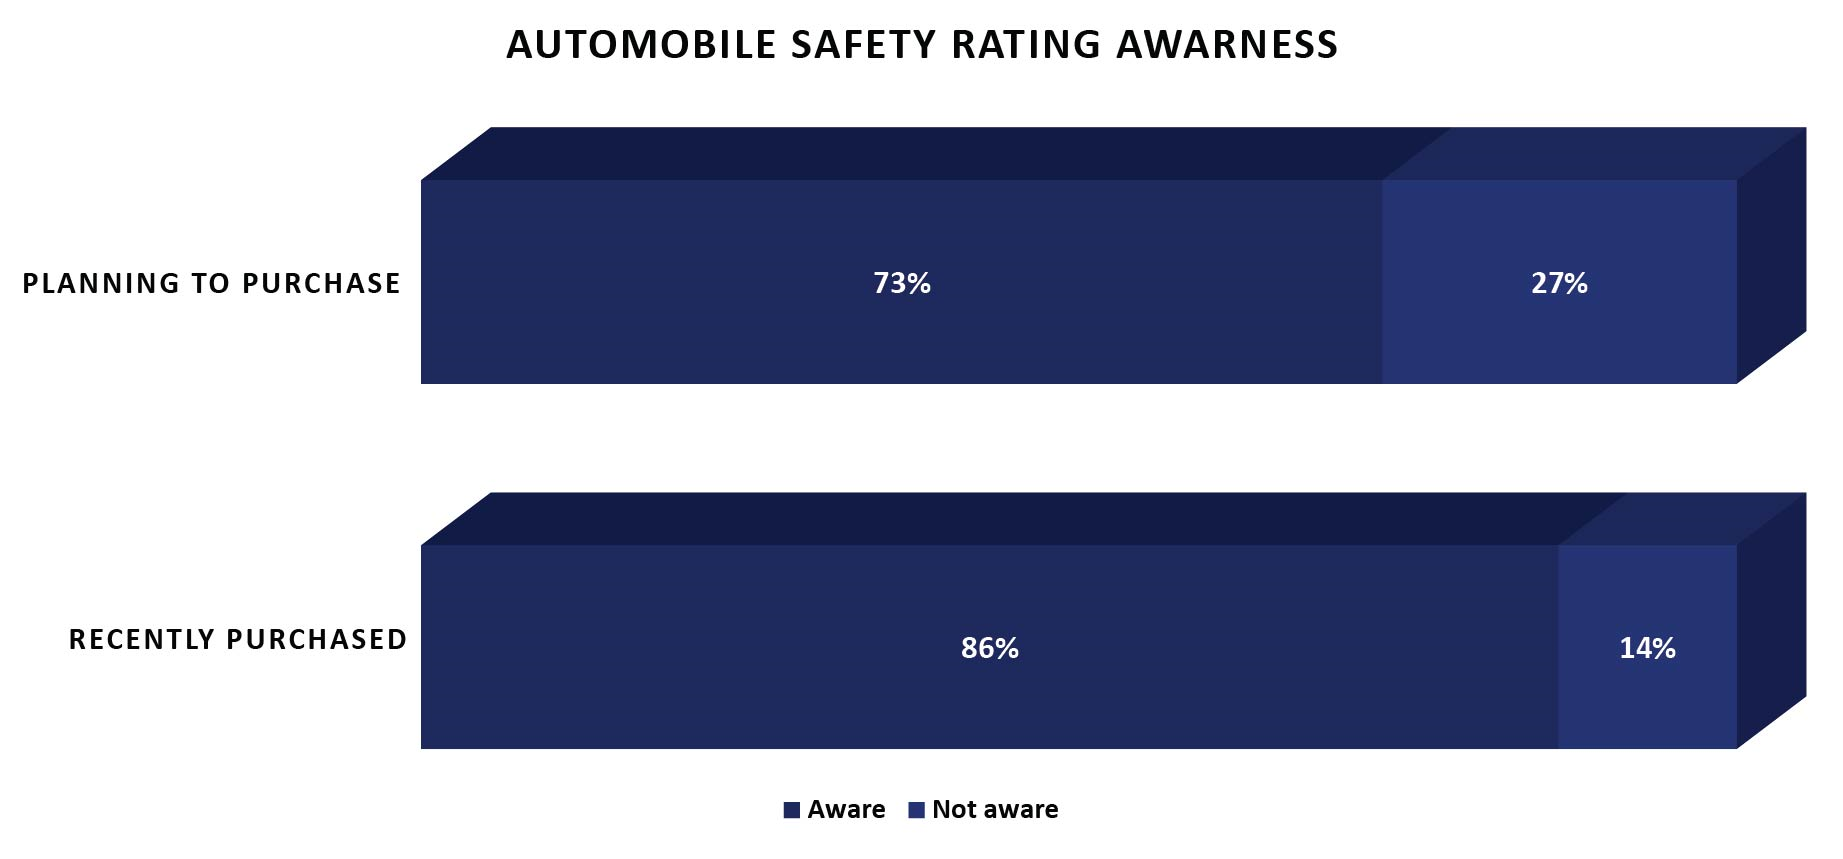 Automobile Safety Rating Awareness in Brazil